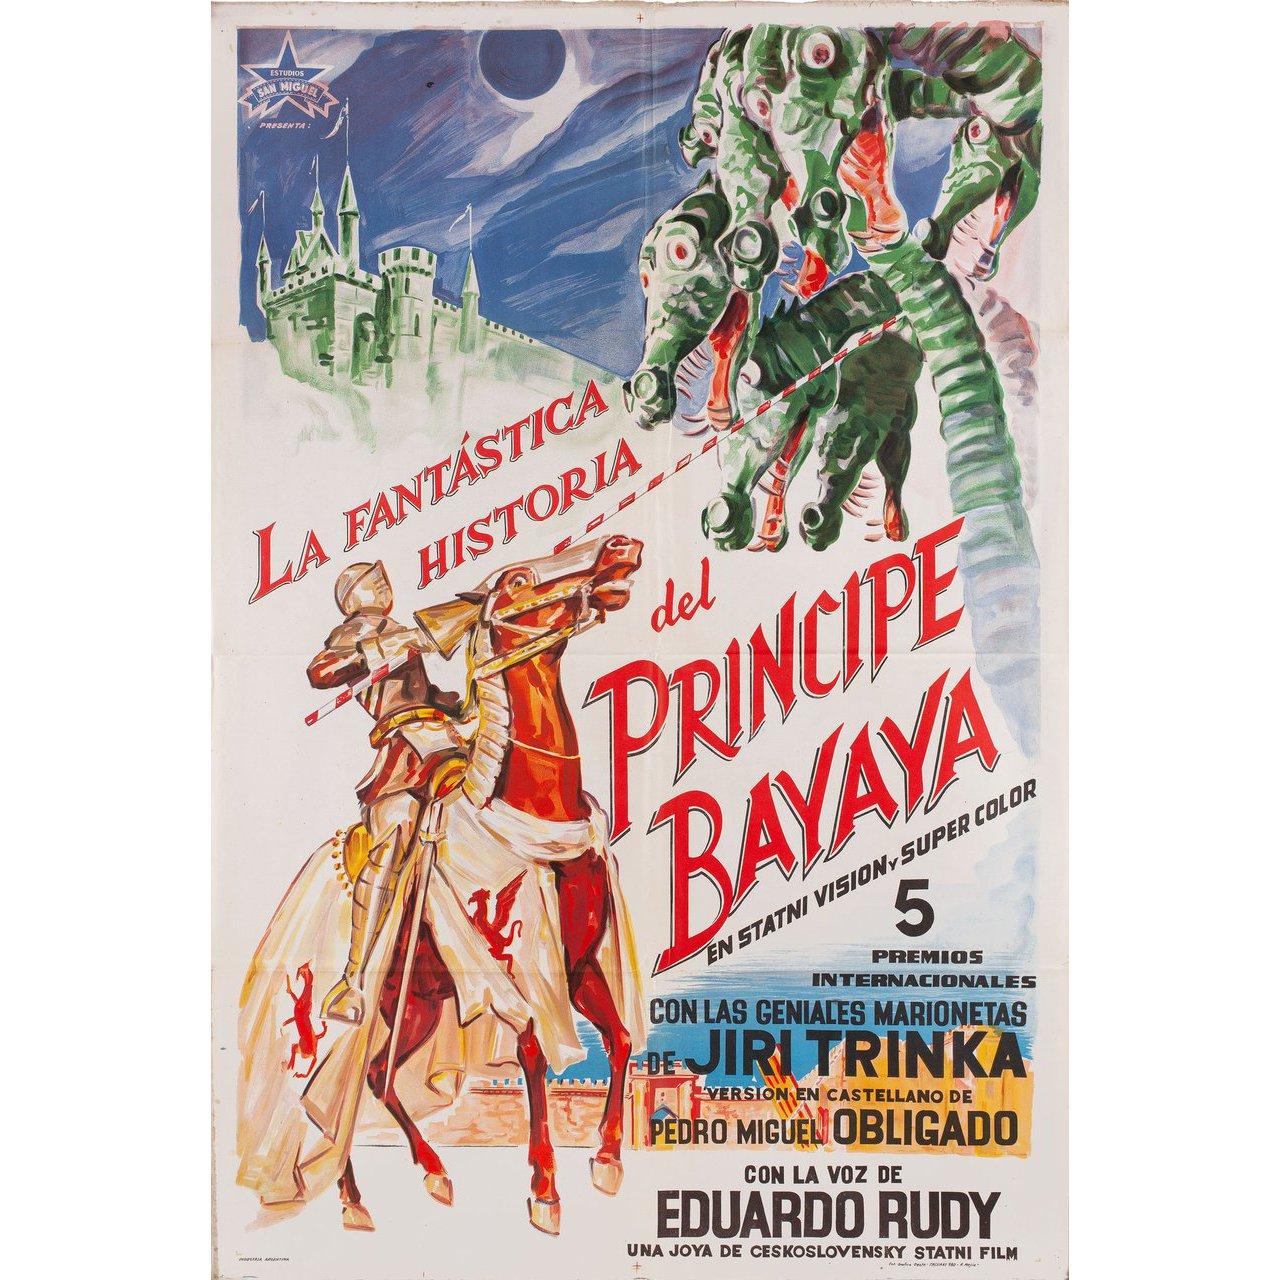 Original 1950 Argentine poster for the film Bajaja directed by Jiri Trnka with Detsky pevecky sbor Jana Kuhna. Very Good condition, folded. Many original posters were issued folded or were subsequently folded. Please note: the size is stated in